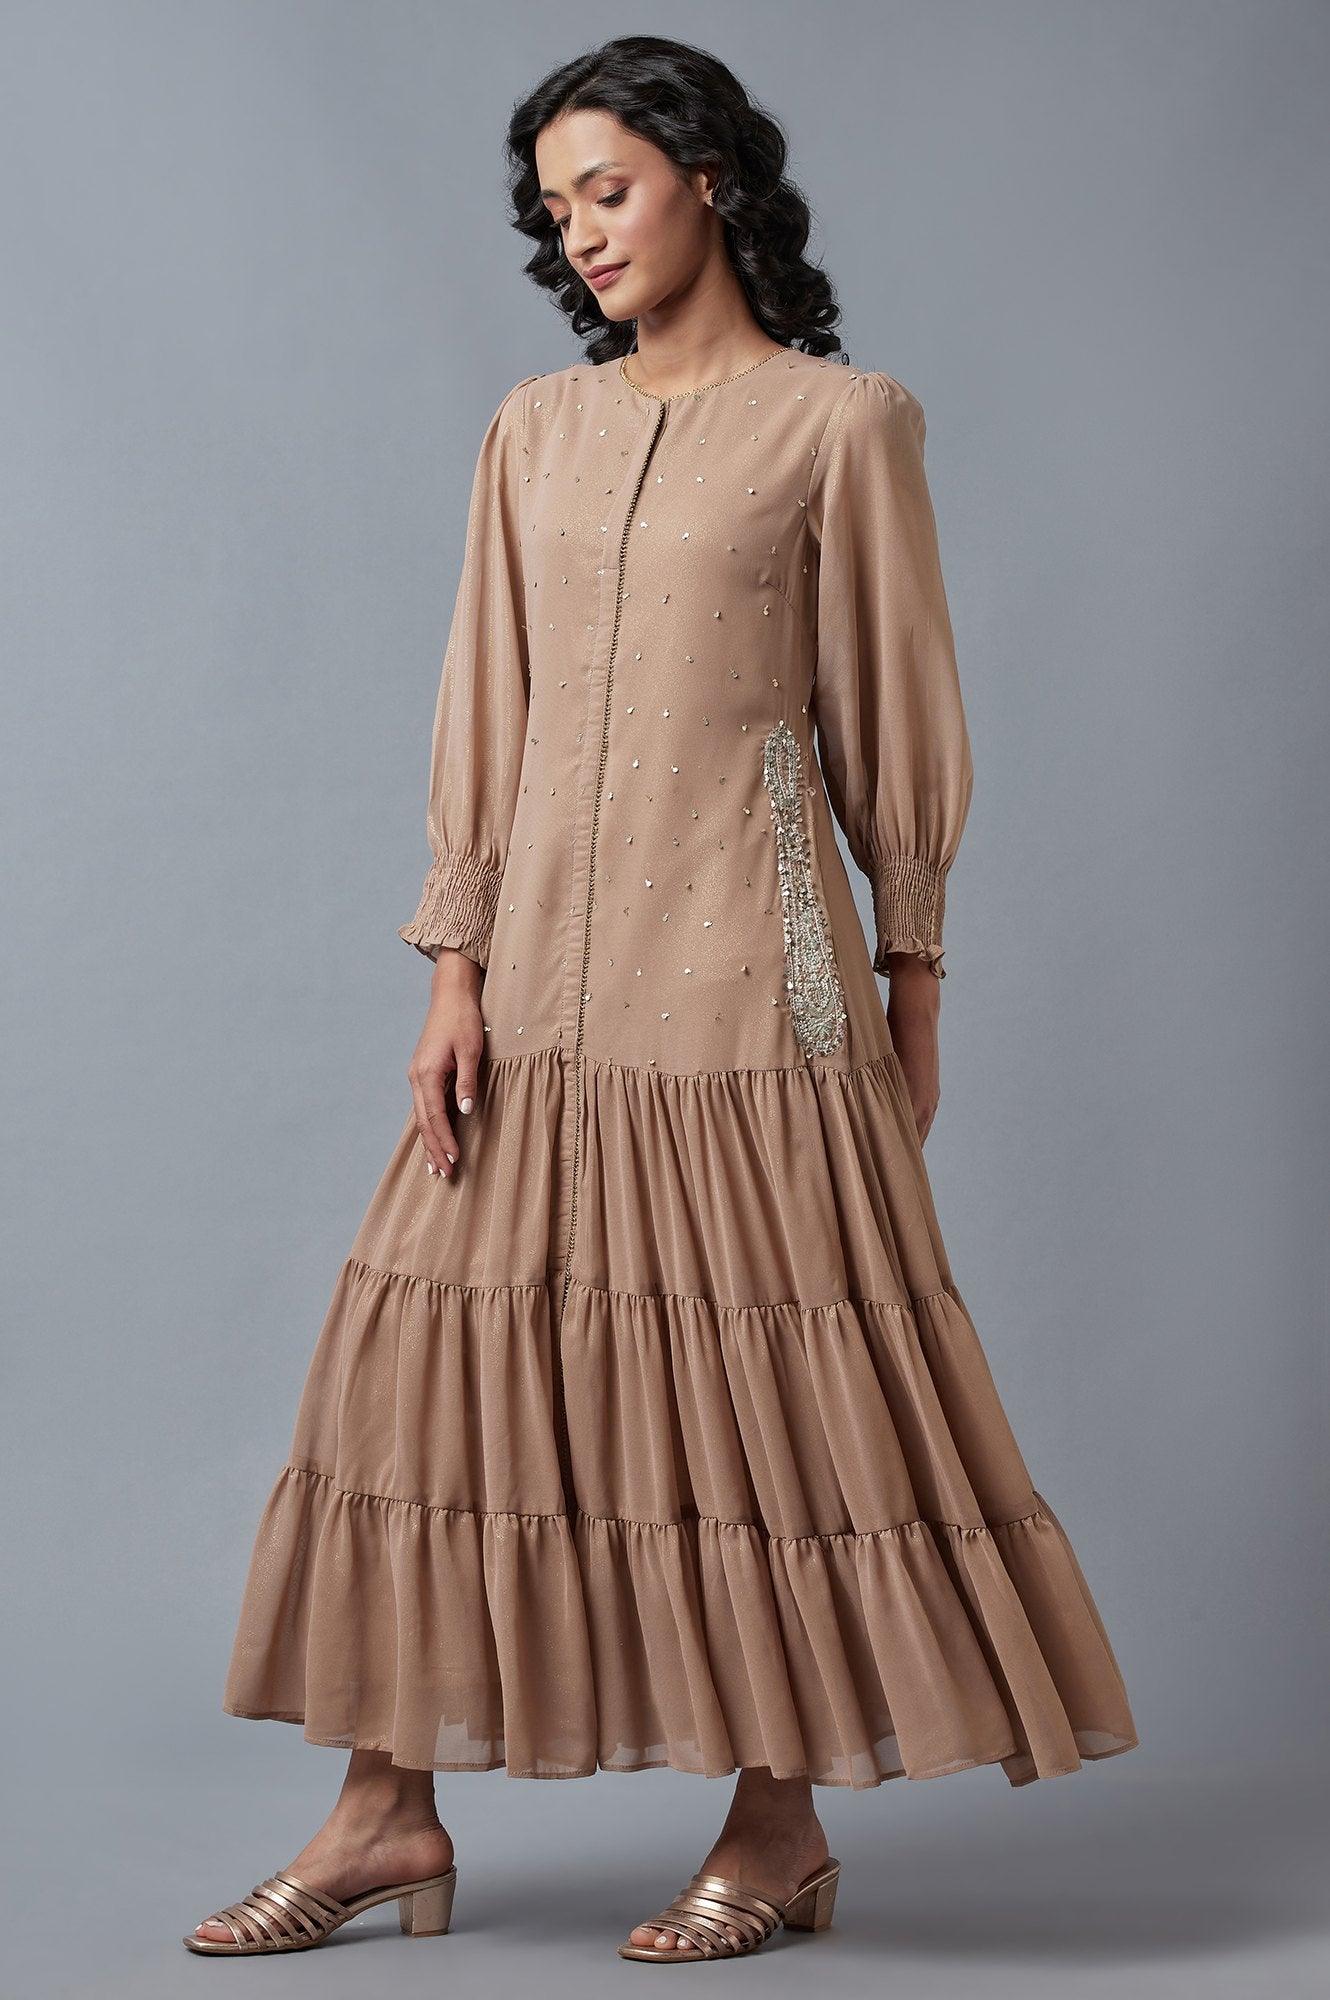 Pink Tiered Round Neck Dress With Metallic Embroidery - wforwoman